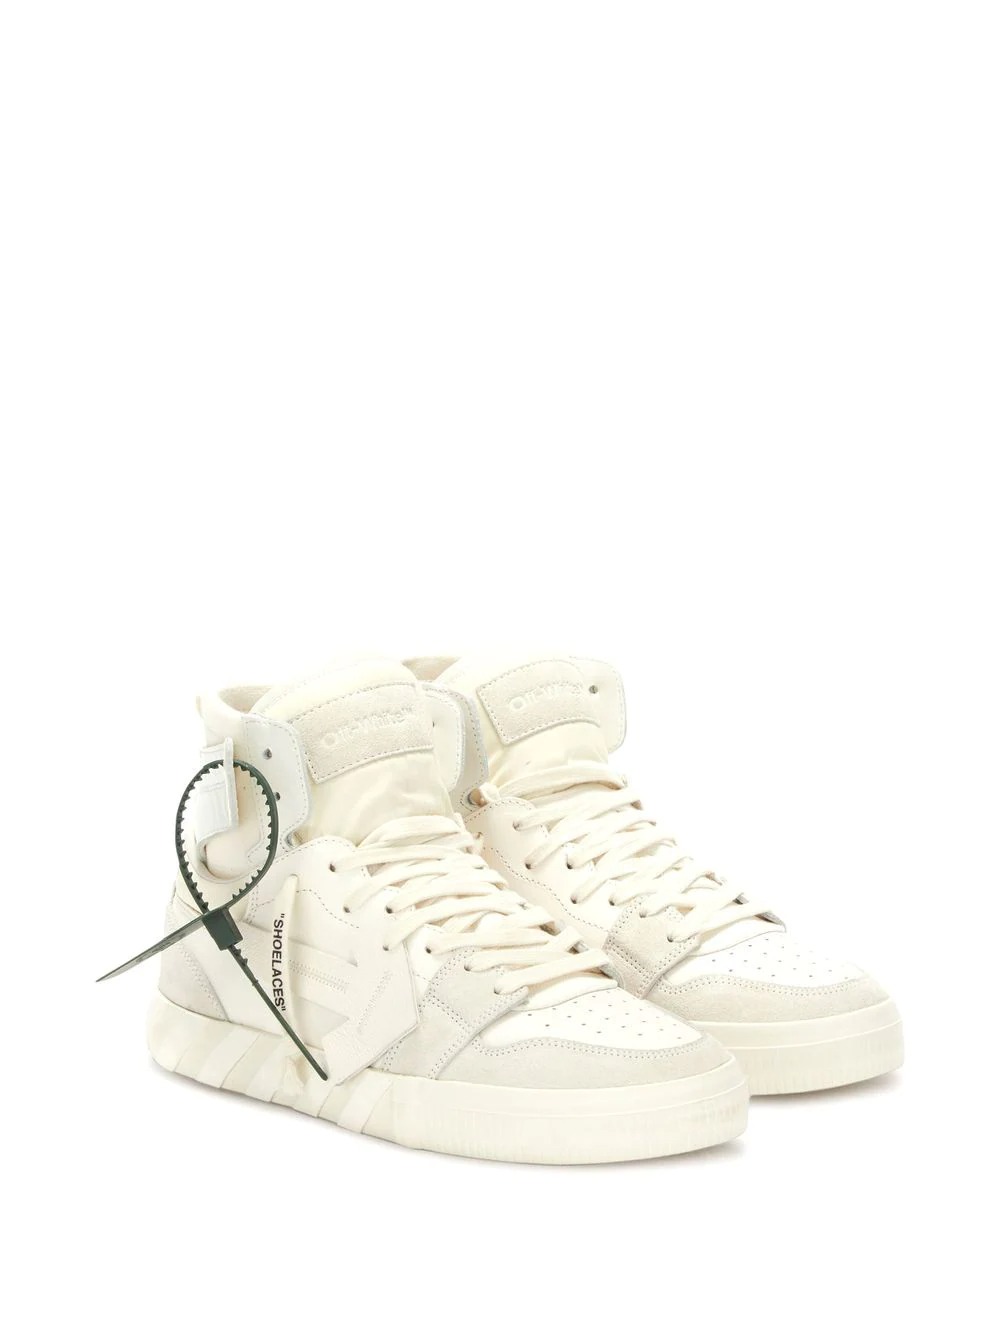 Buy Sneakers Off-White Vulcanized high-top sneakers 